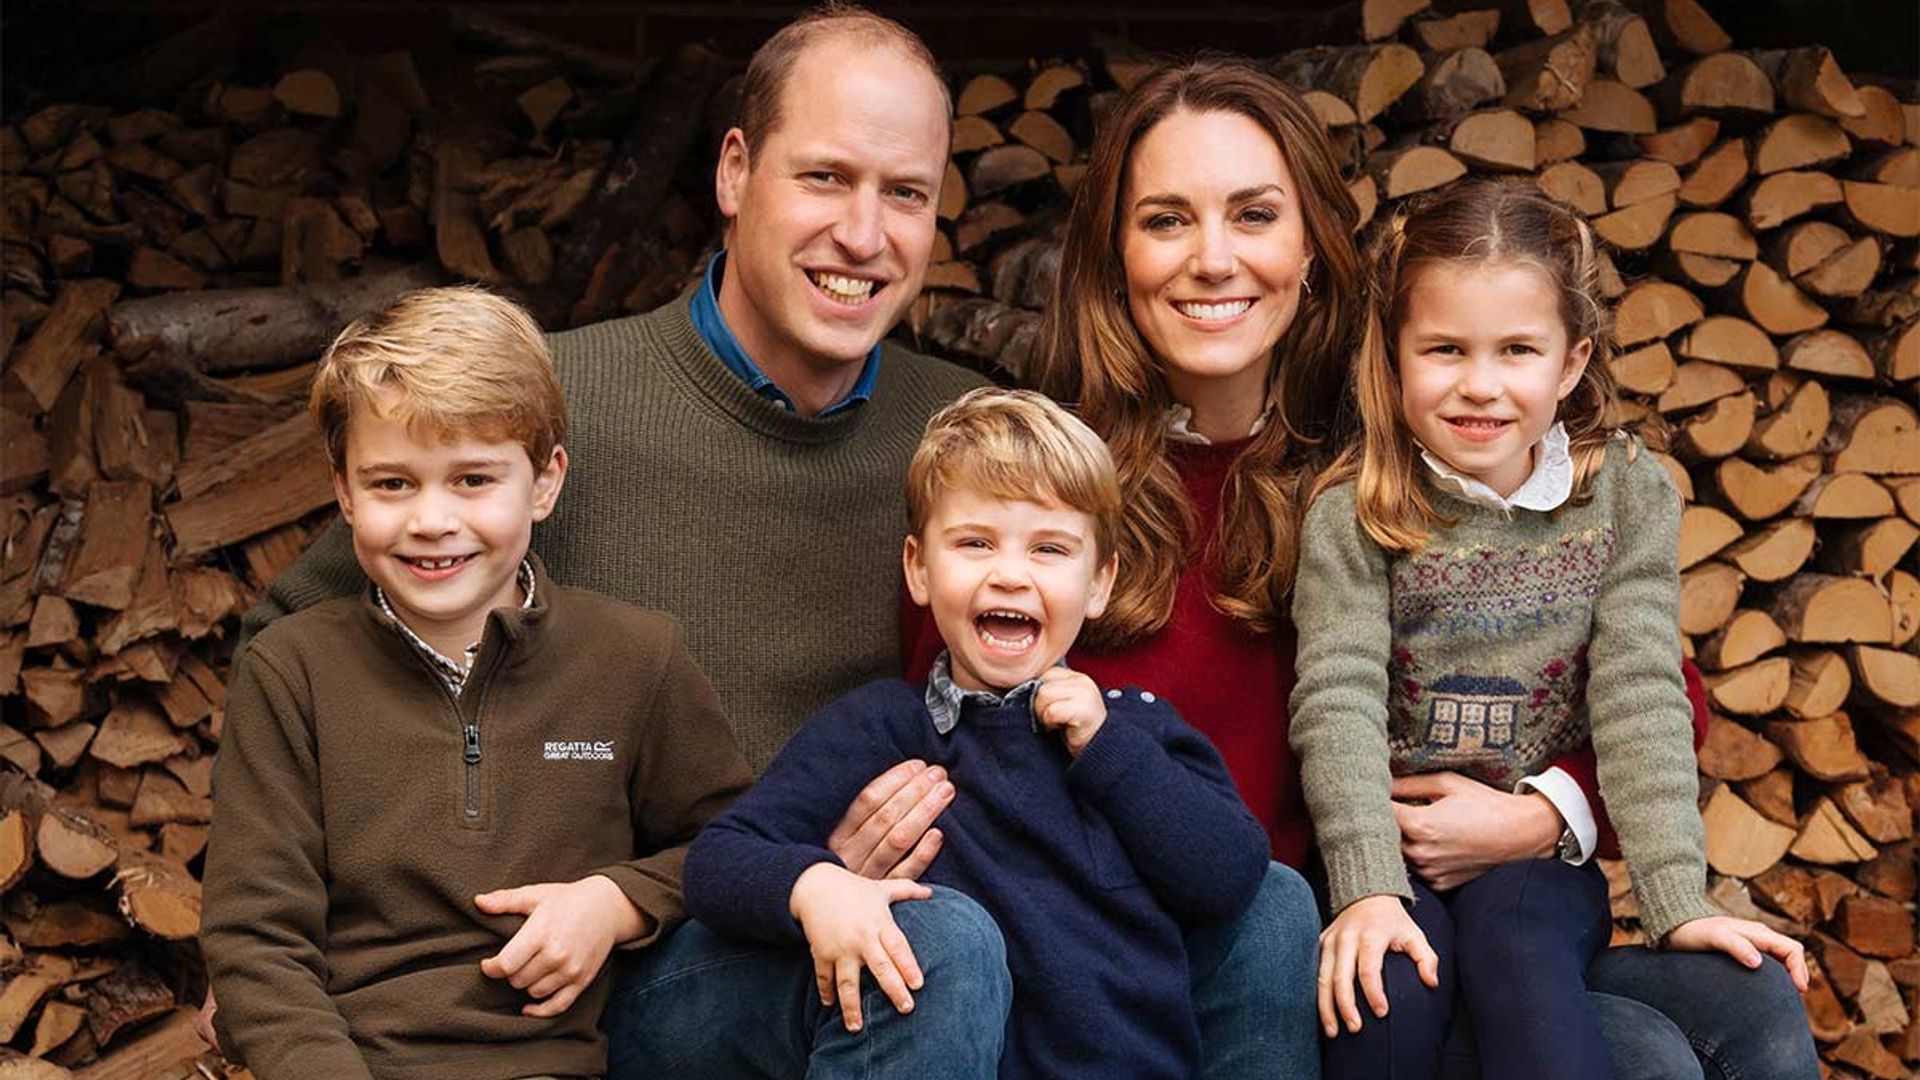 Prince William and Kate Middleton to move house with Prince George, Princess Charlotte and Prince Louis